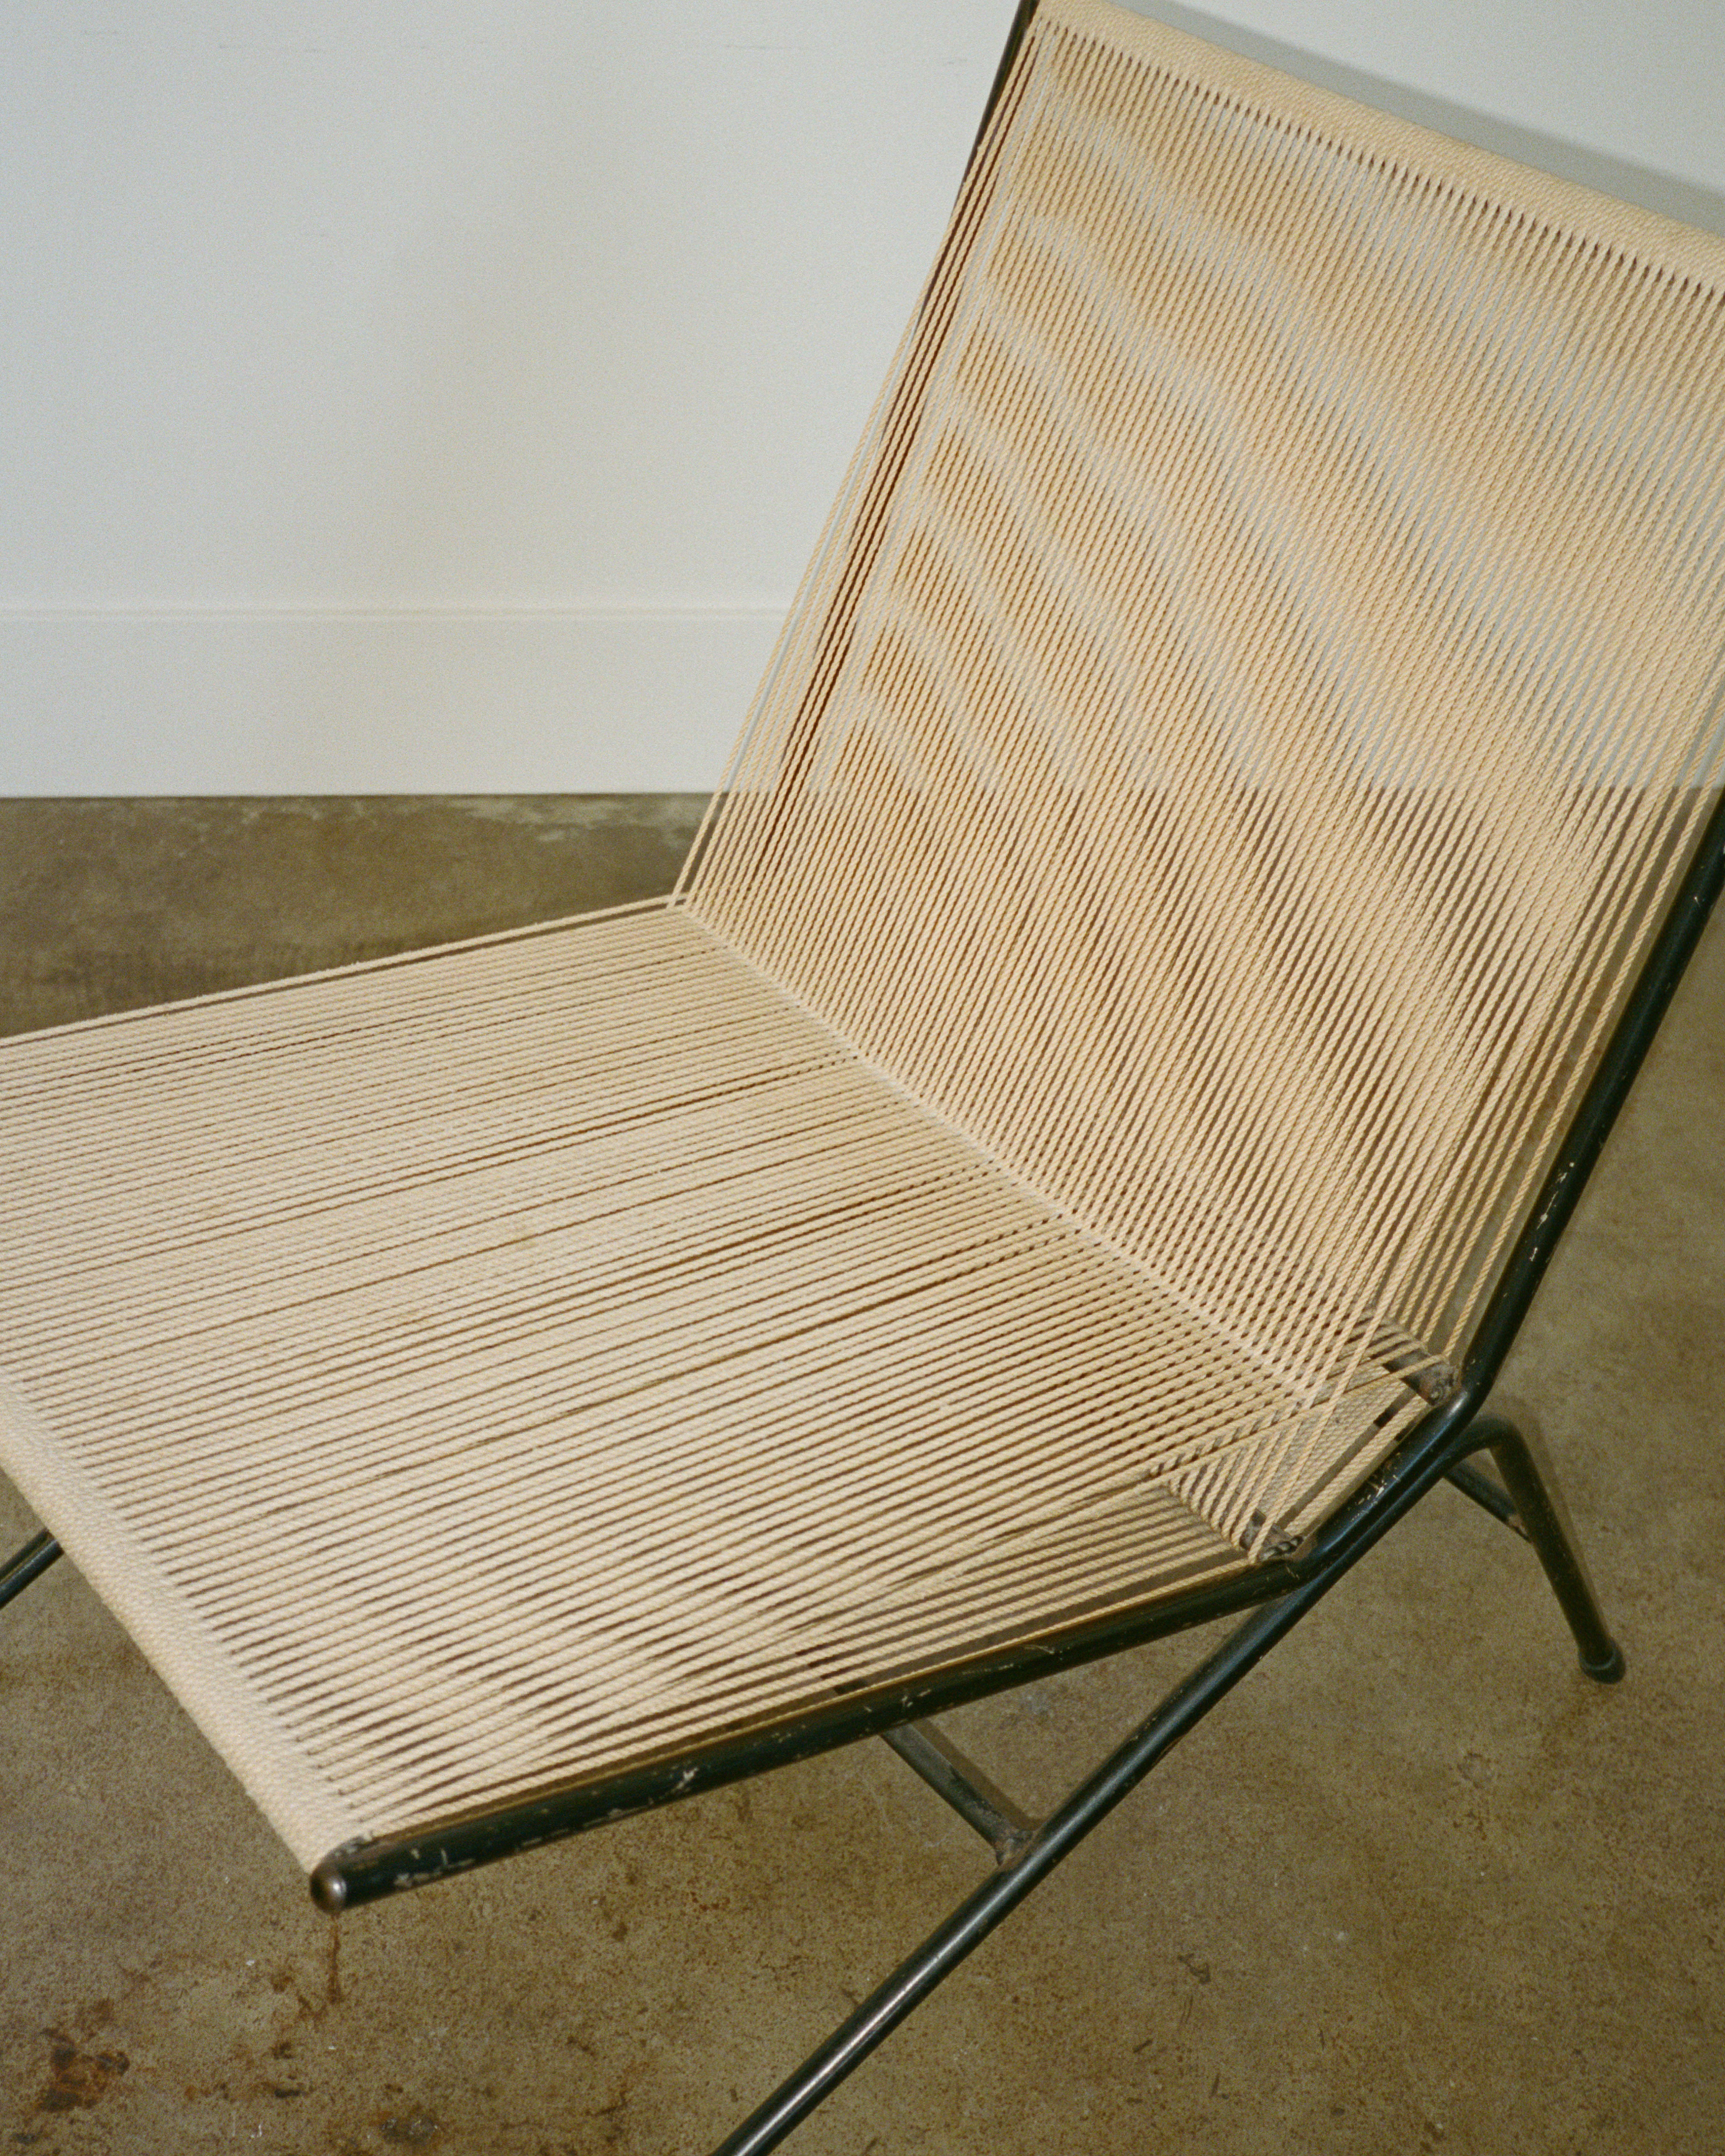 String Lounge Chair 1952